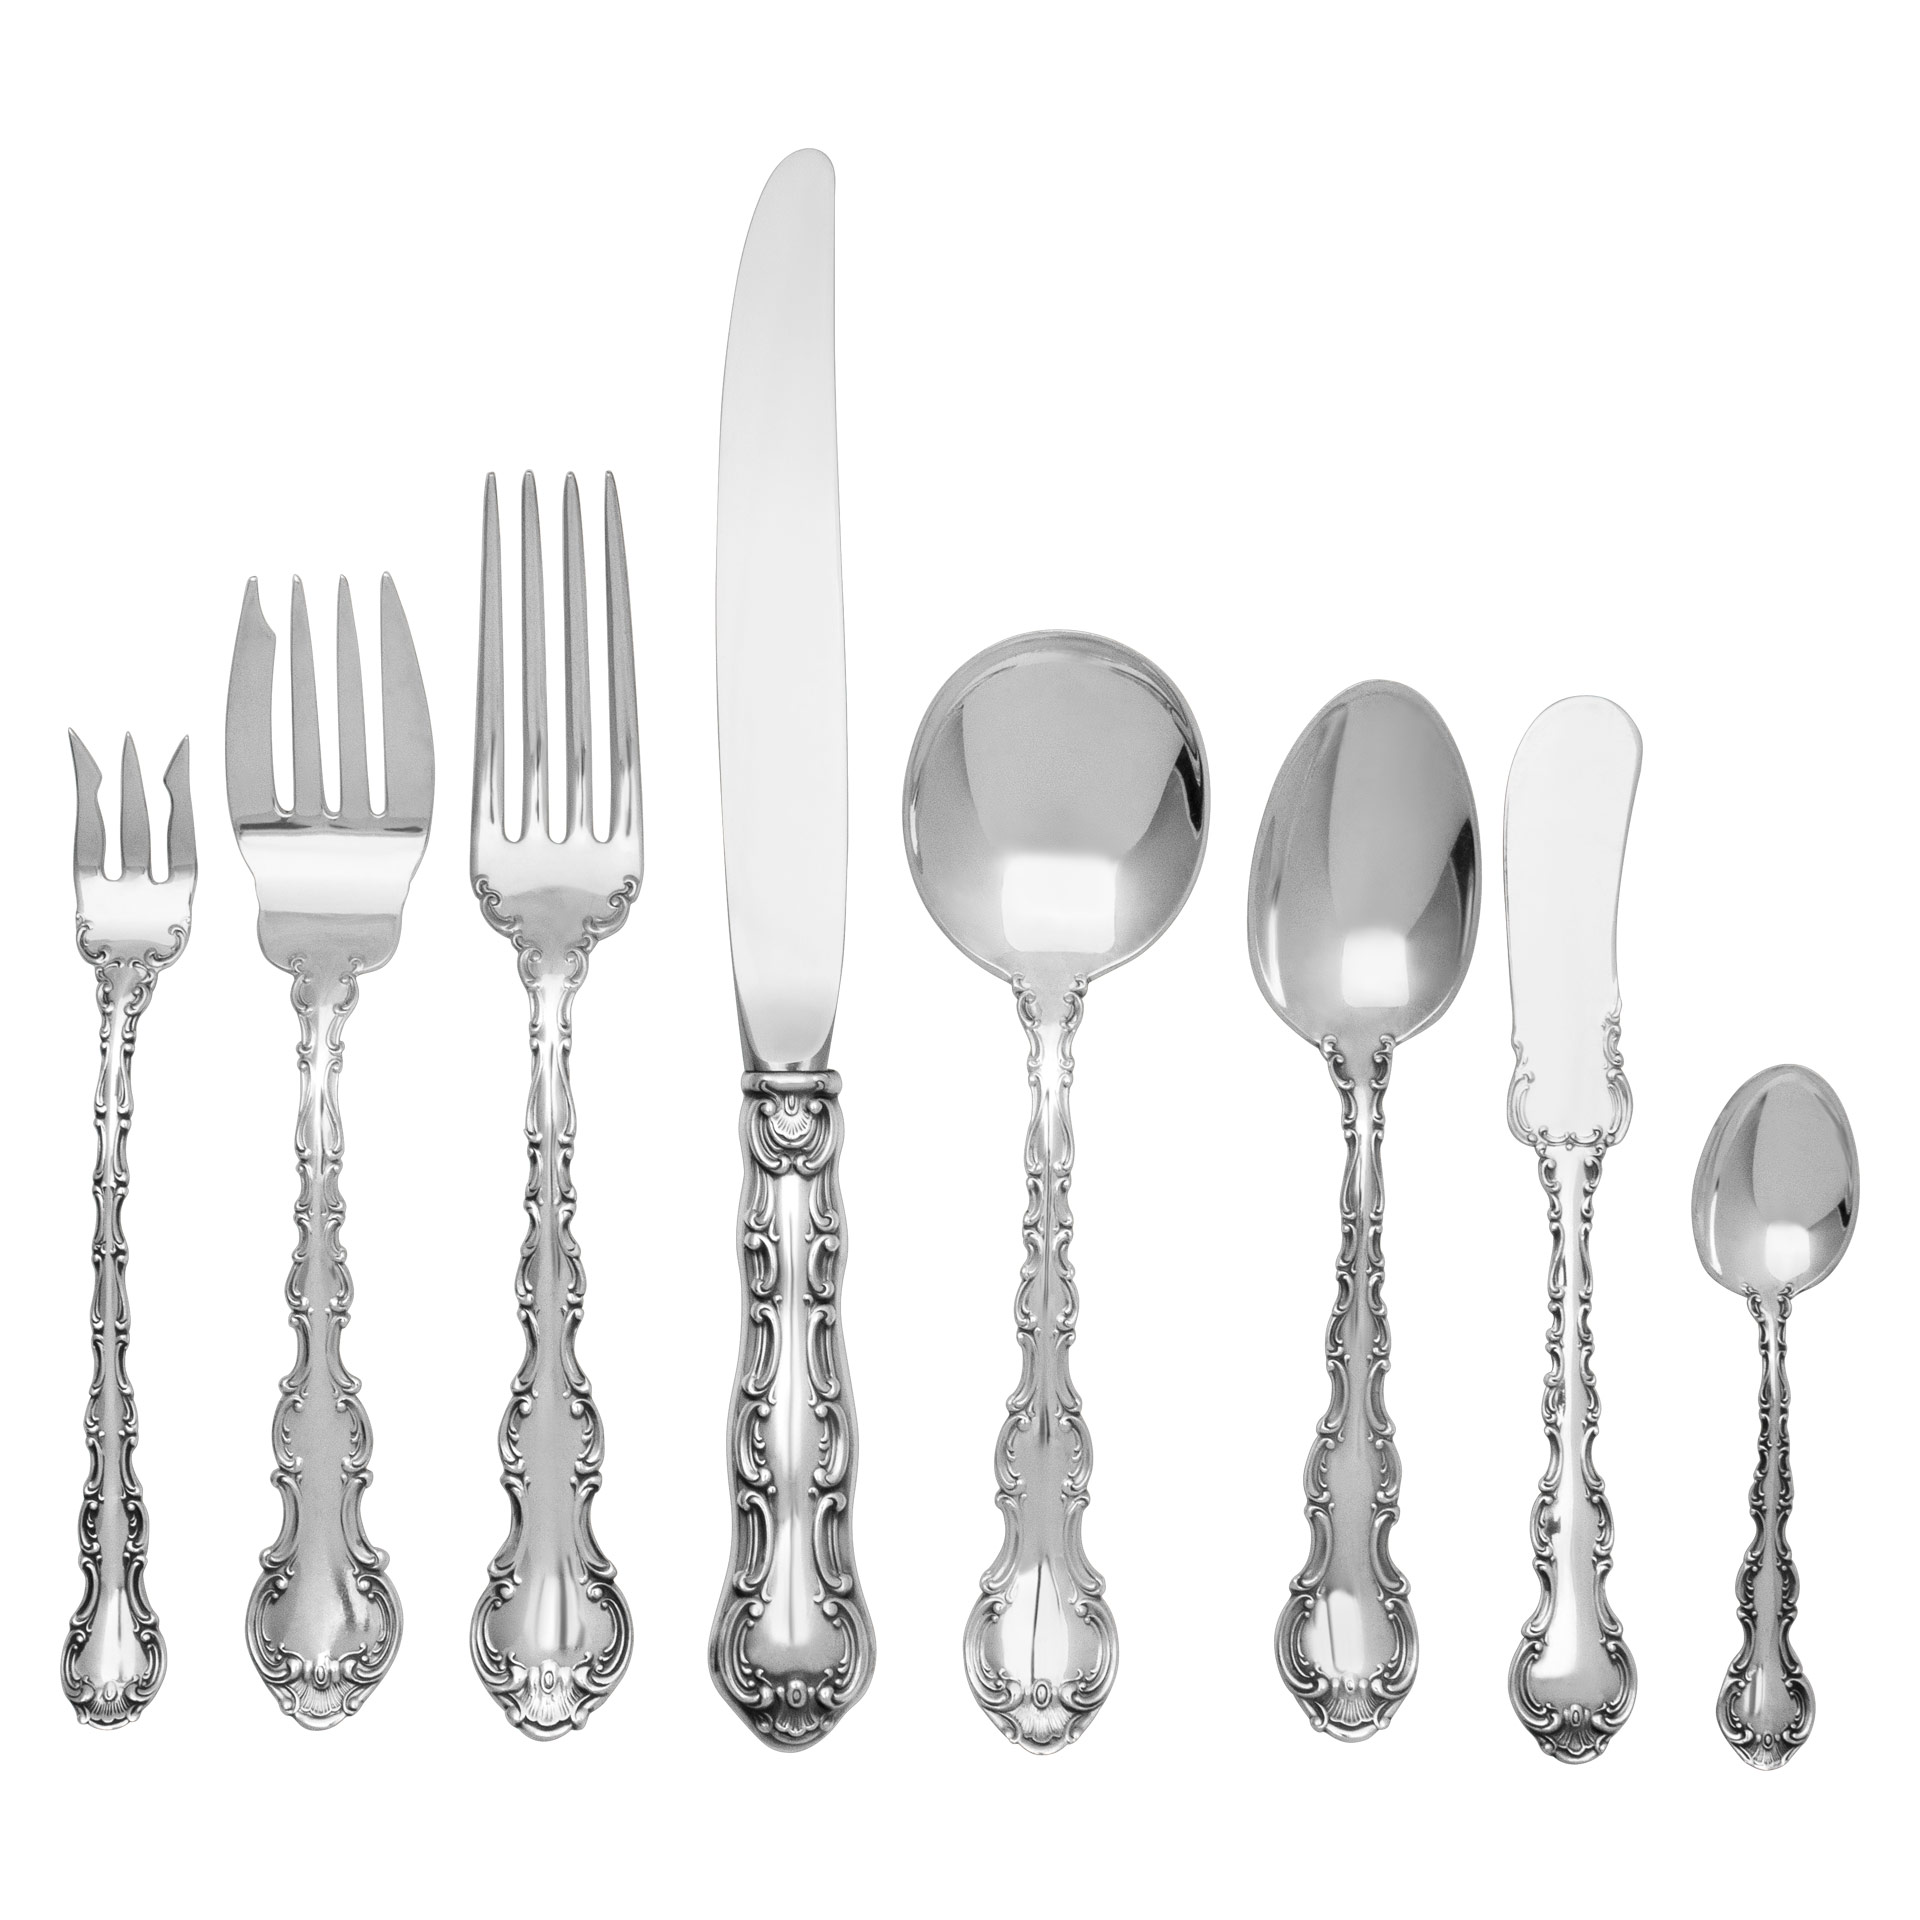 SUPER SIZED "Strasbourg" Sterling Silver Flatware set patented by Gorham in  1897-  8 Place setting for 12 (plus) with 18 serving pieces- Over 3300 grams sterling silver.